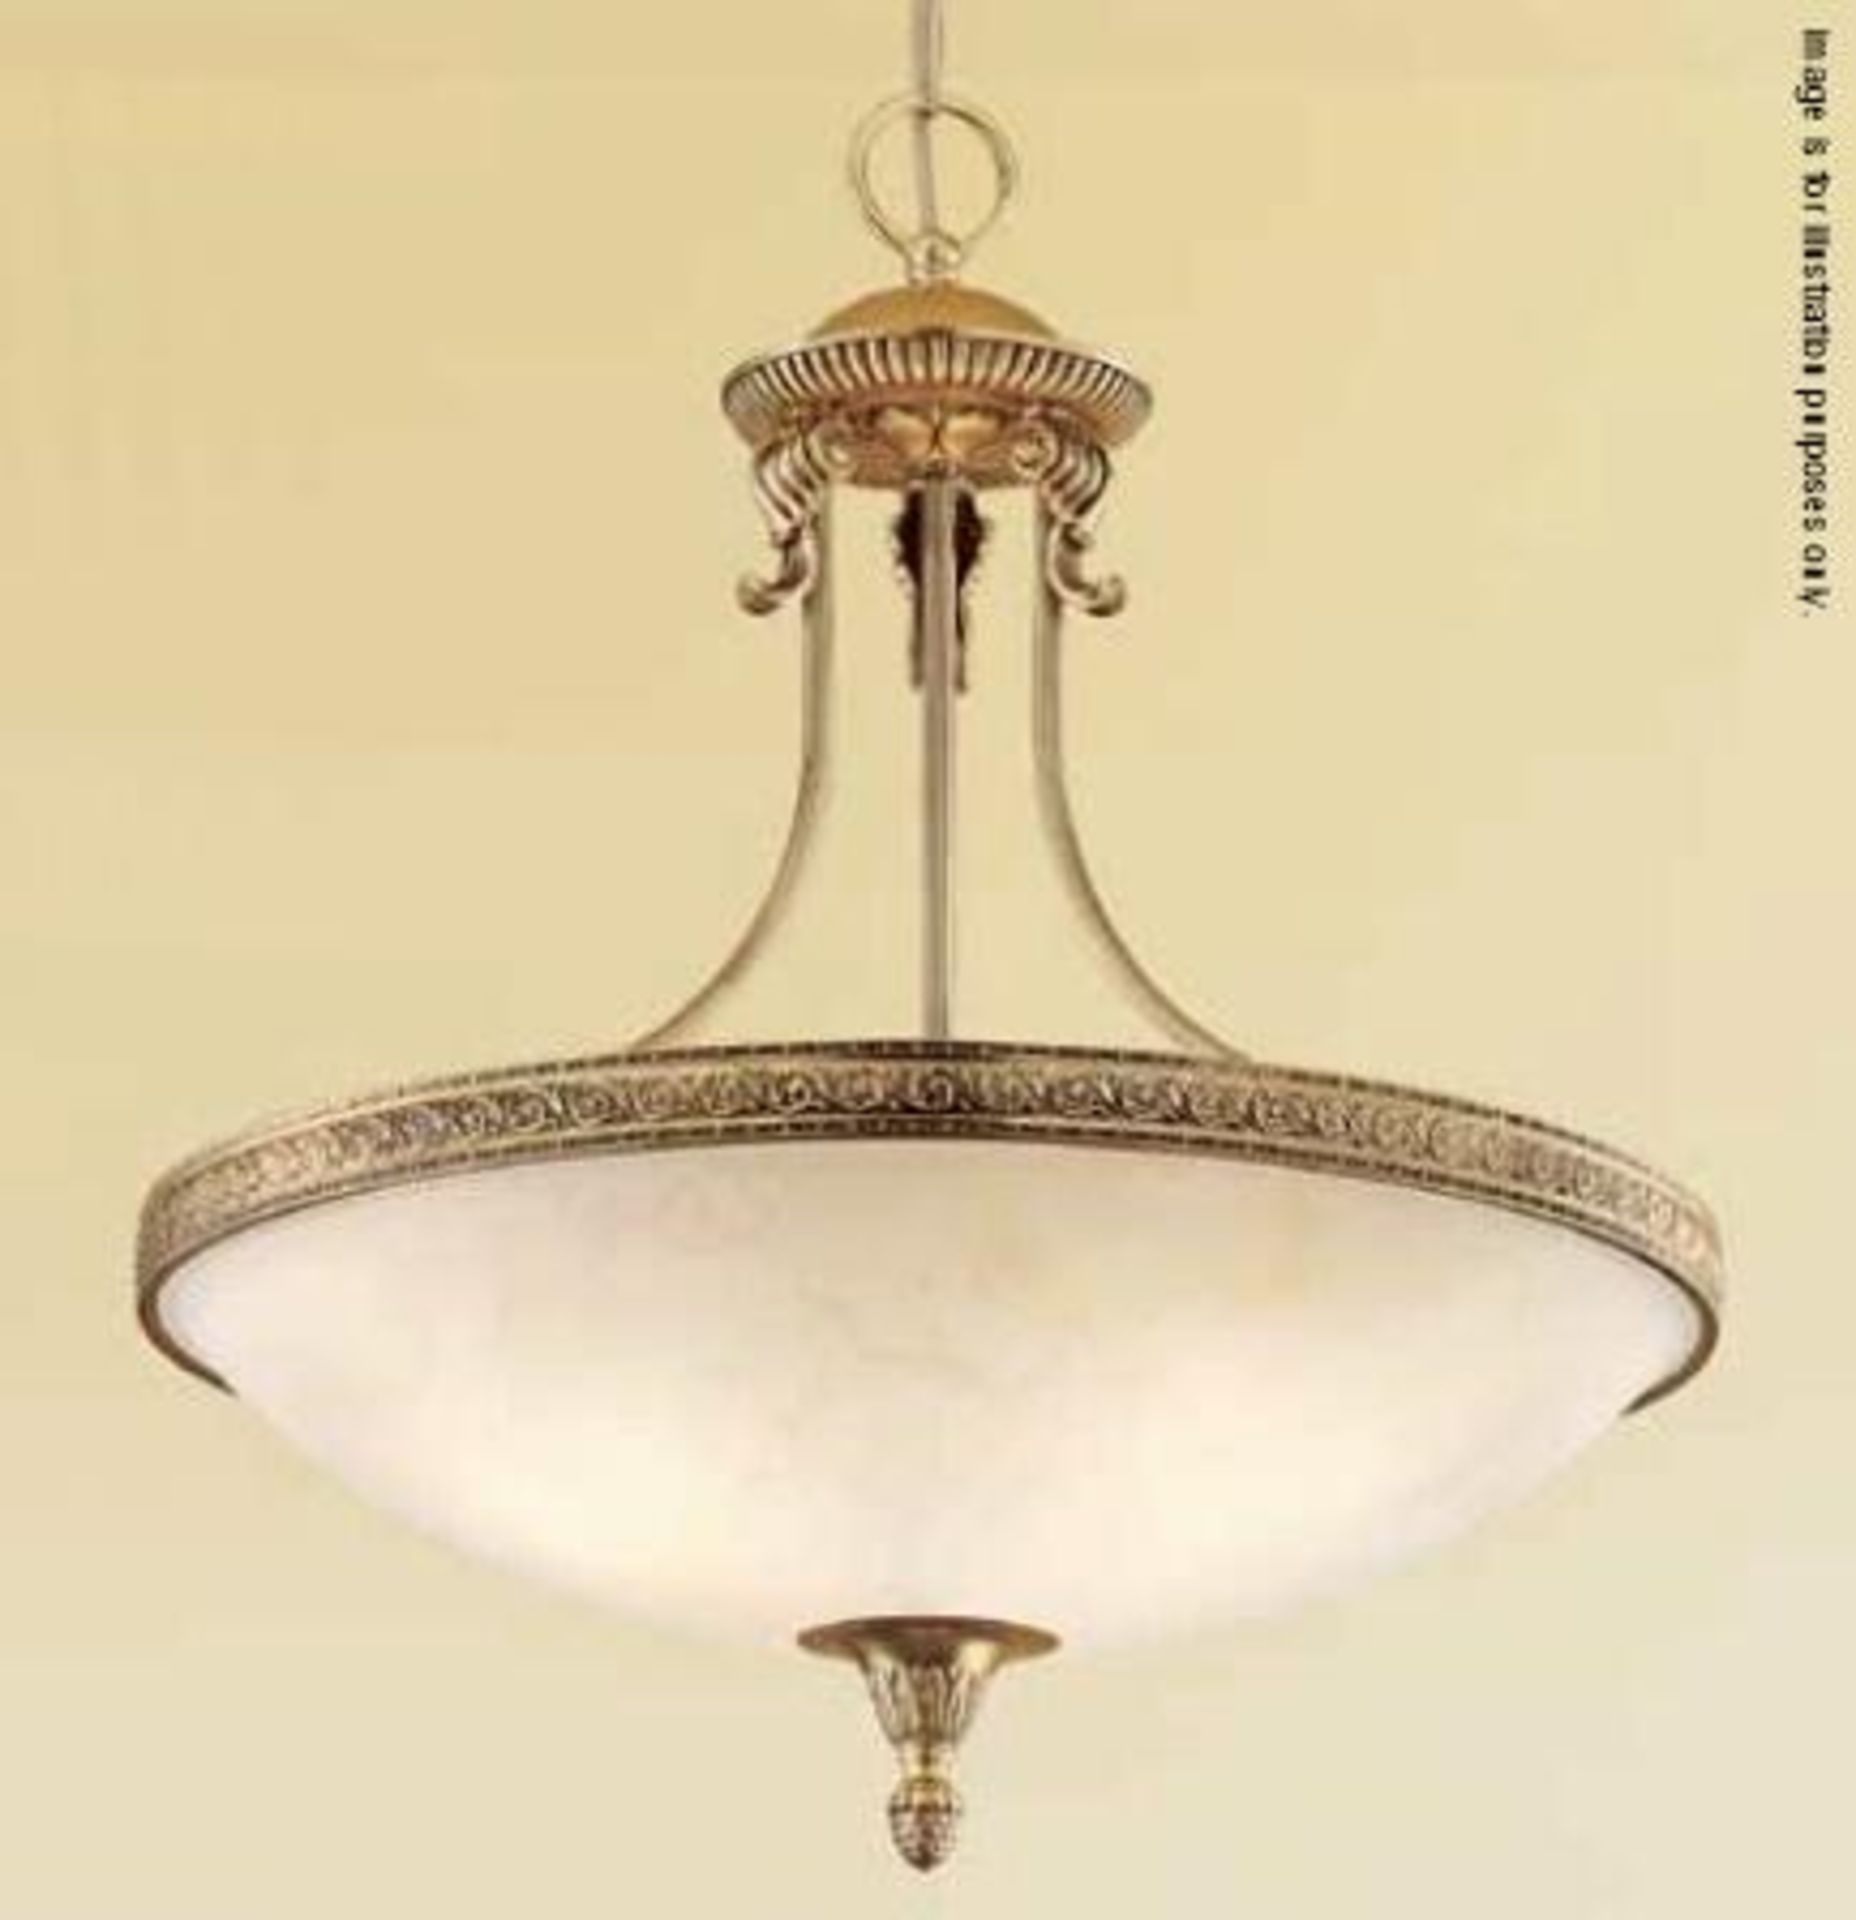 1 x Chelsom MANOIR Pendant Light Fitting With A French Gold Finish - Diameter 51cm - Sealed Boxed St